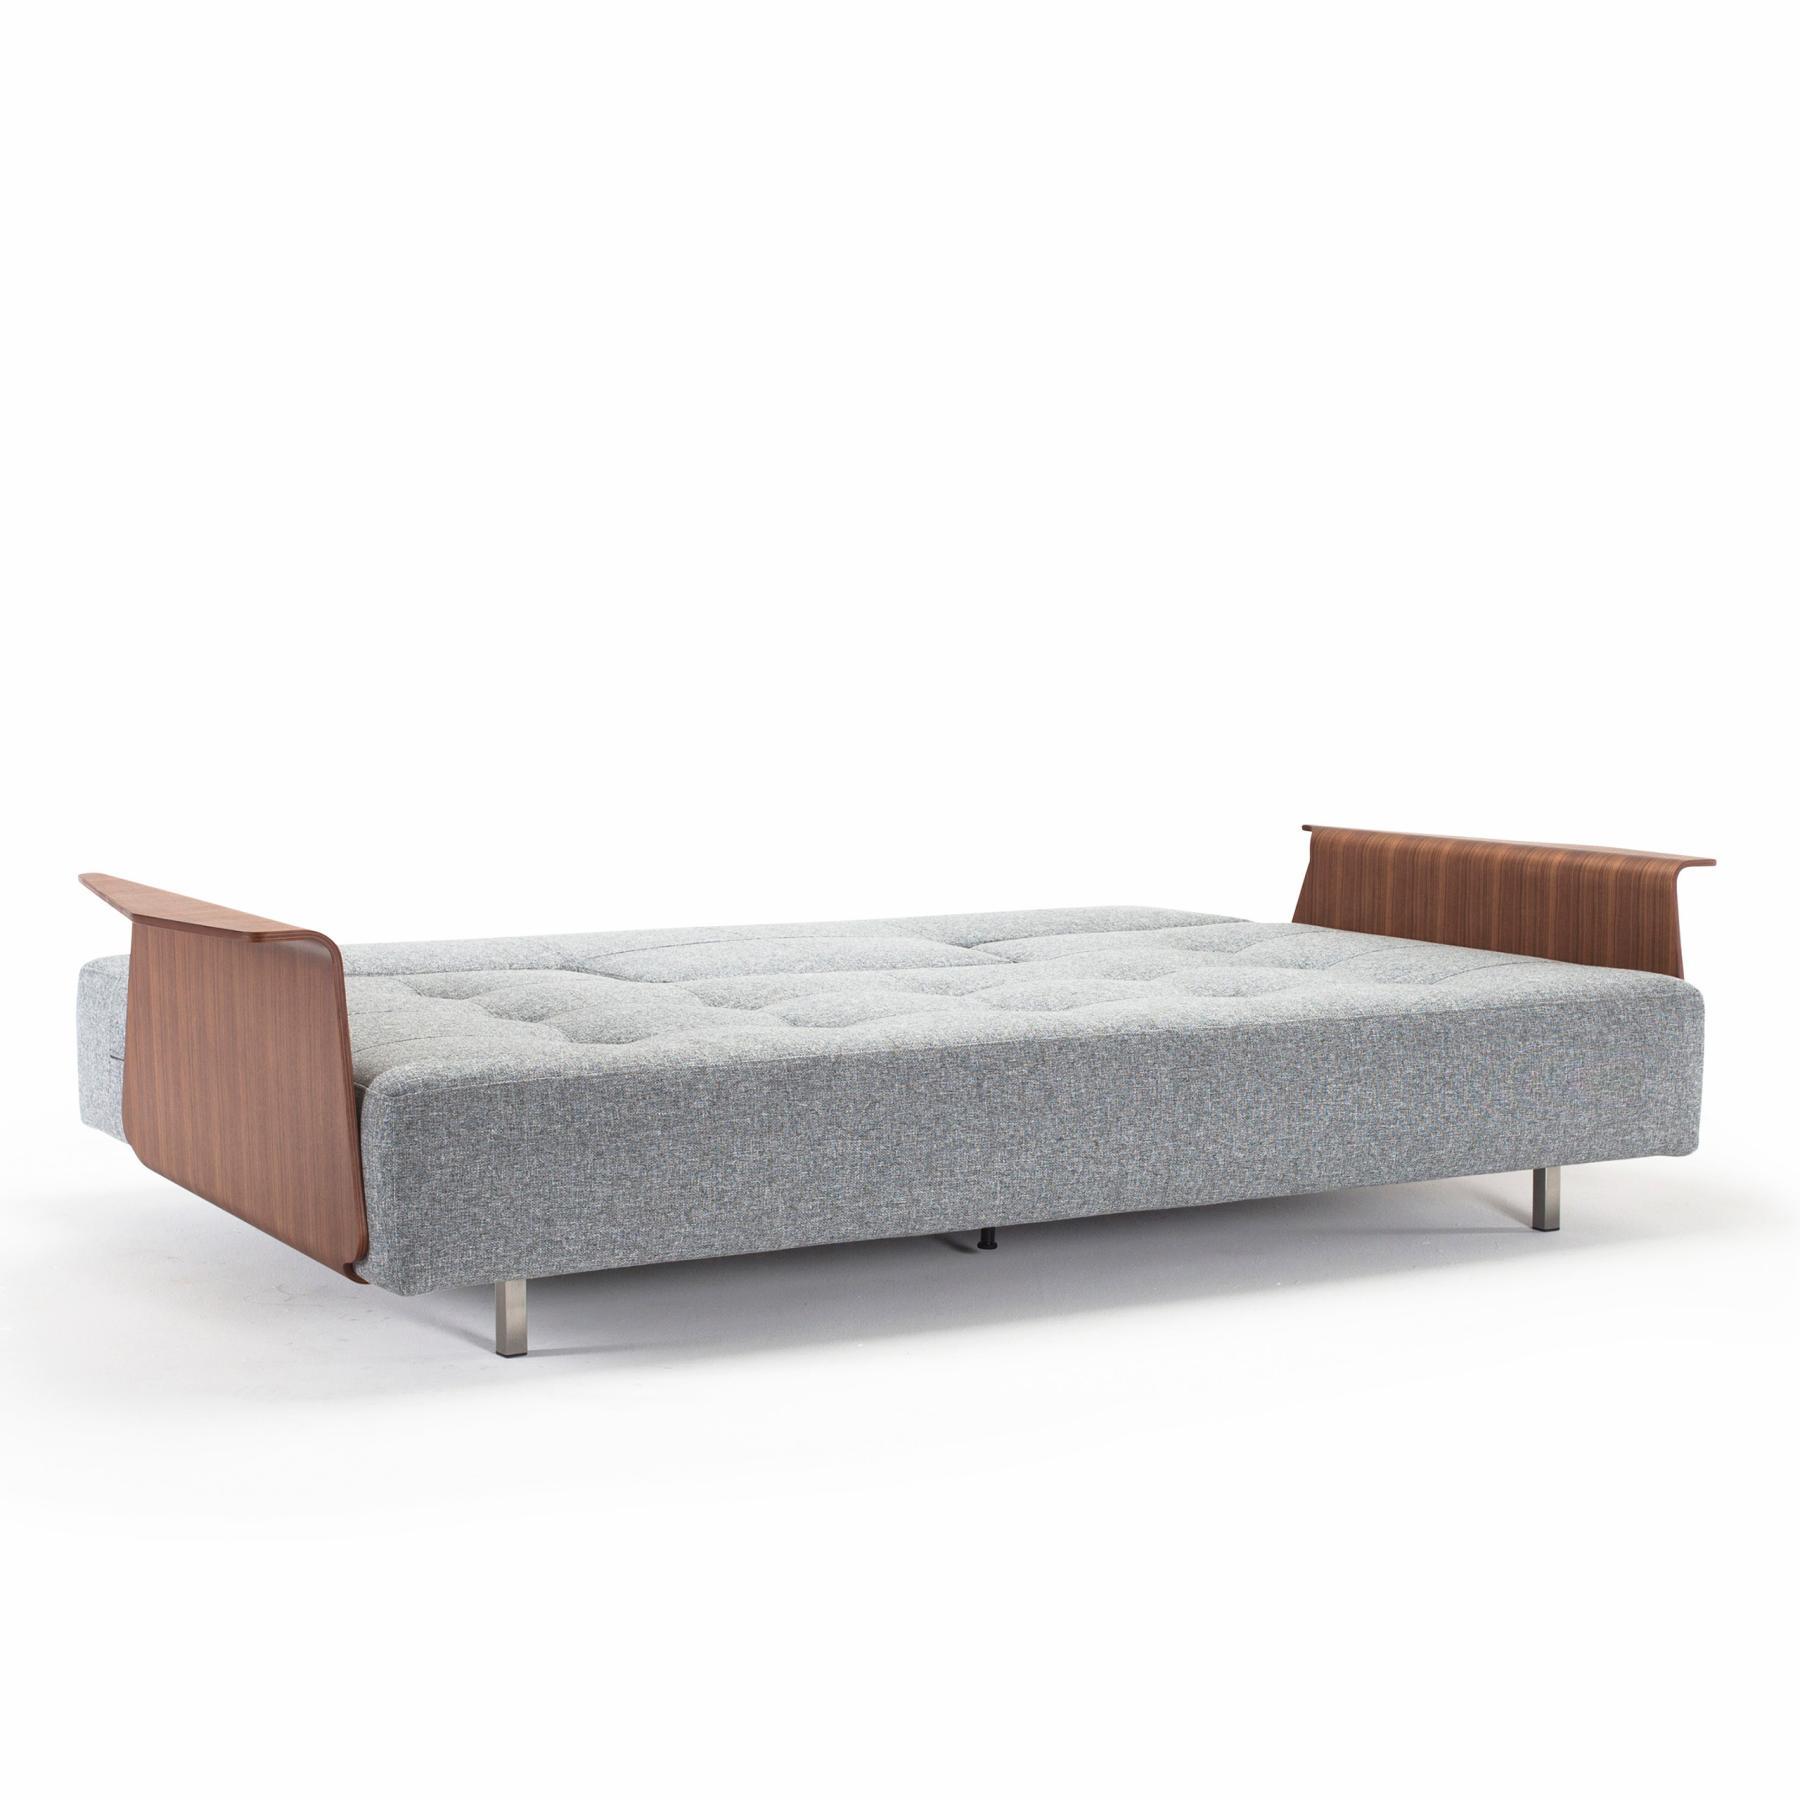 long-horn-sofa-with-arms-565-p2